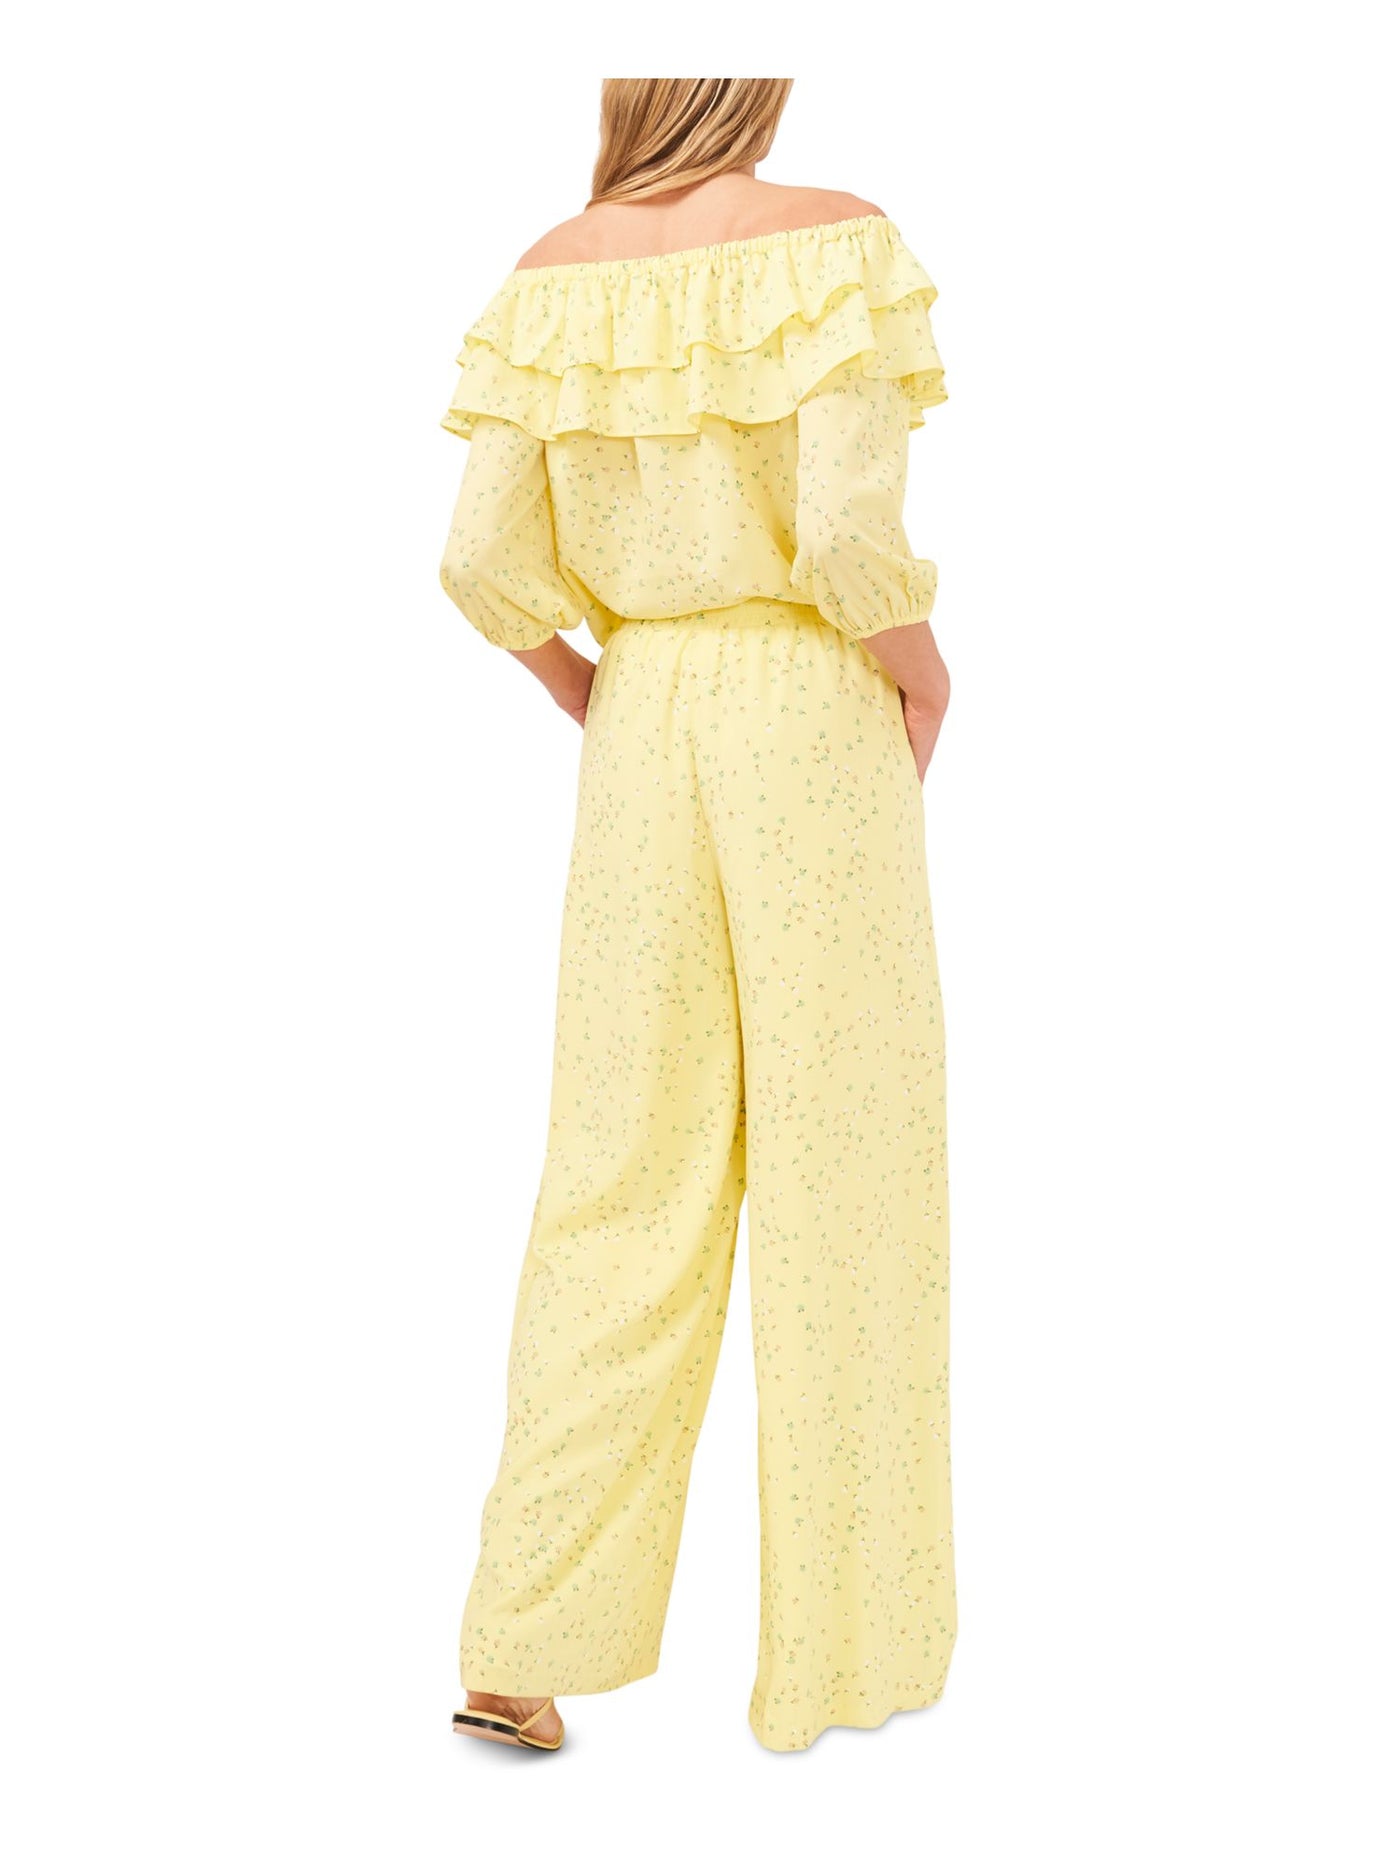 RILEY&RAE Womens Yellow Floral Party Wide Leg Pants XS